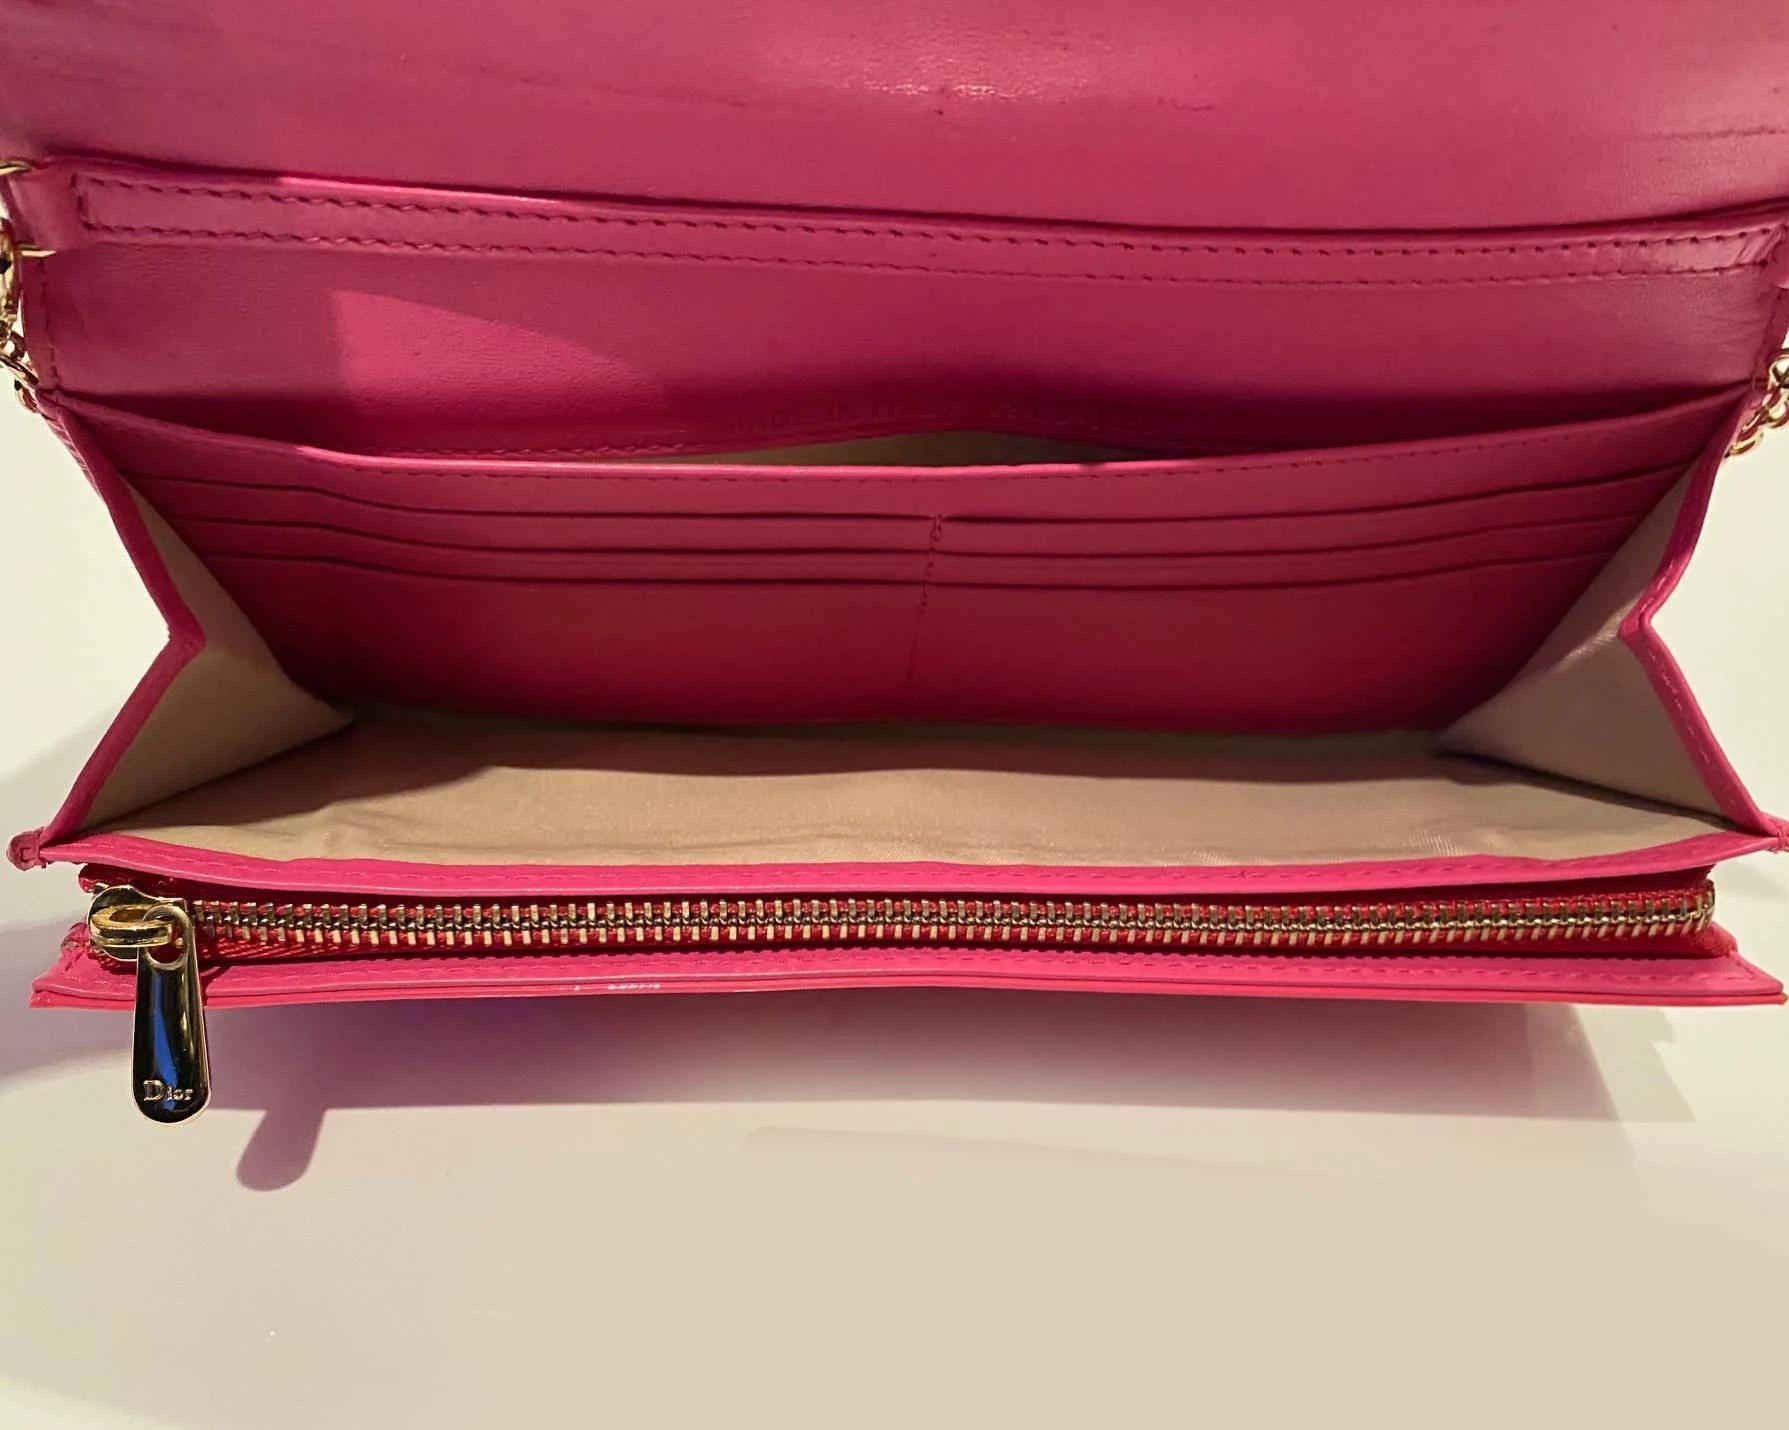 2000s Christian Dior Pink Patent Leather Handbag  In Good Condition For Sale In London, GB